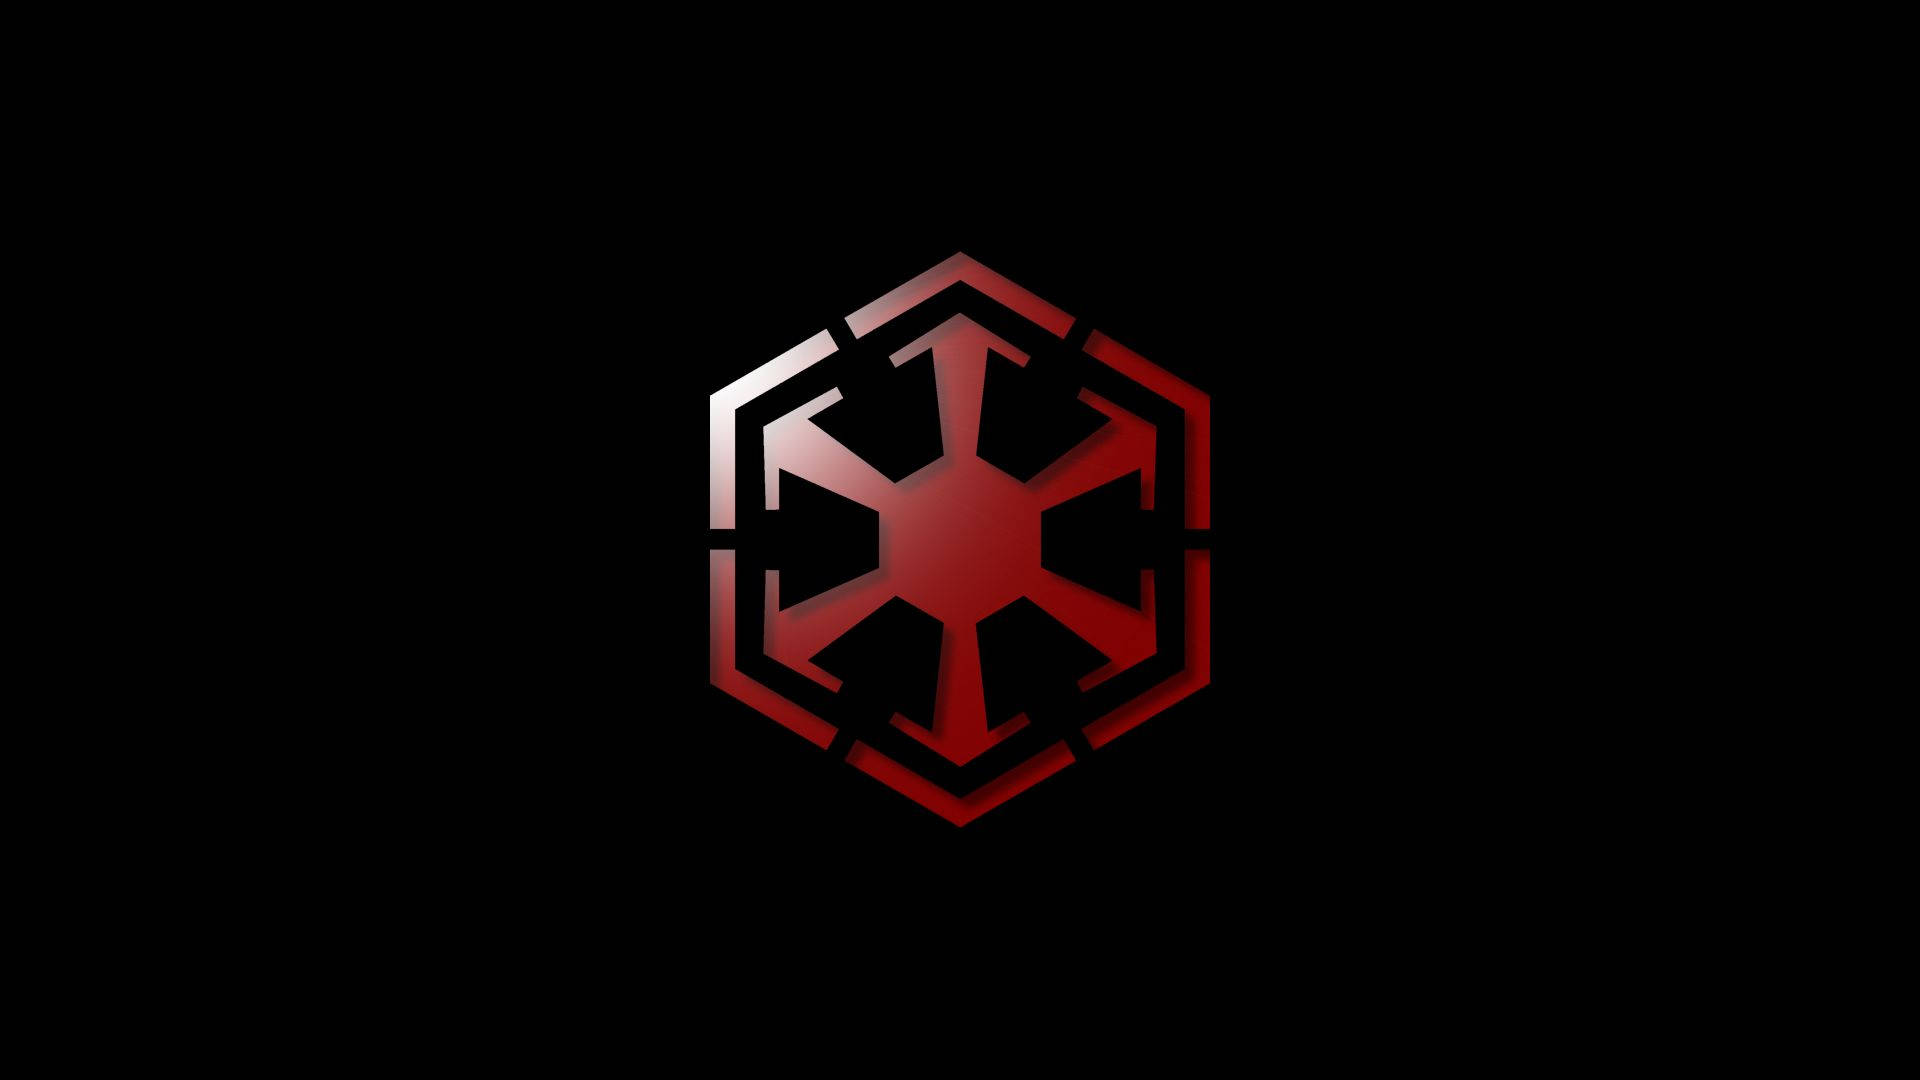 Sith Logo In Black Background